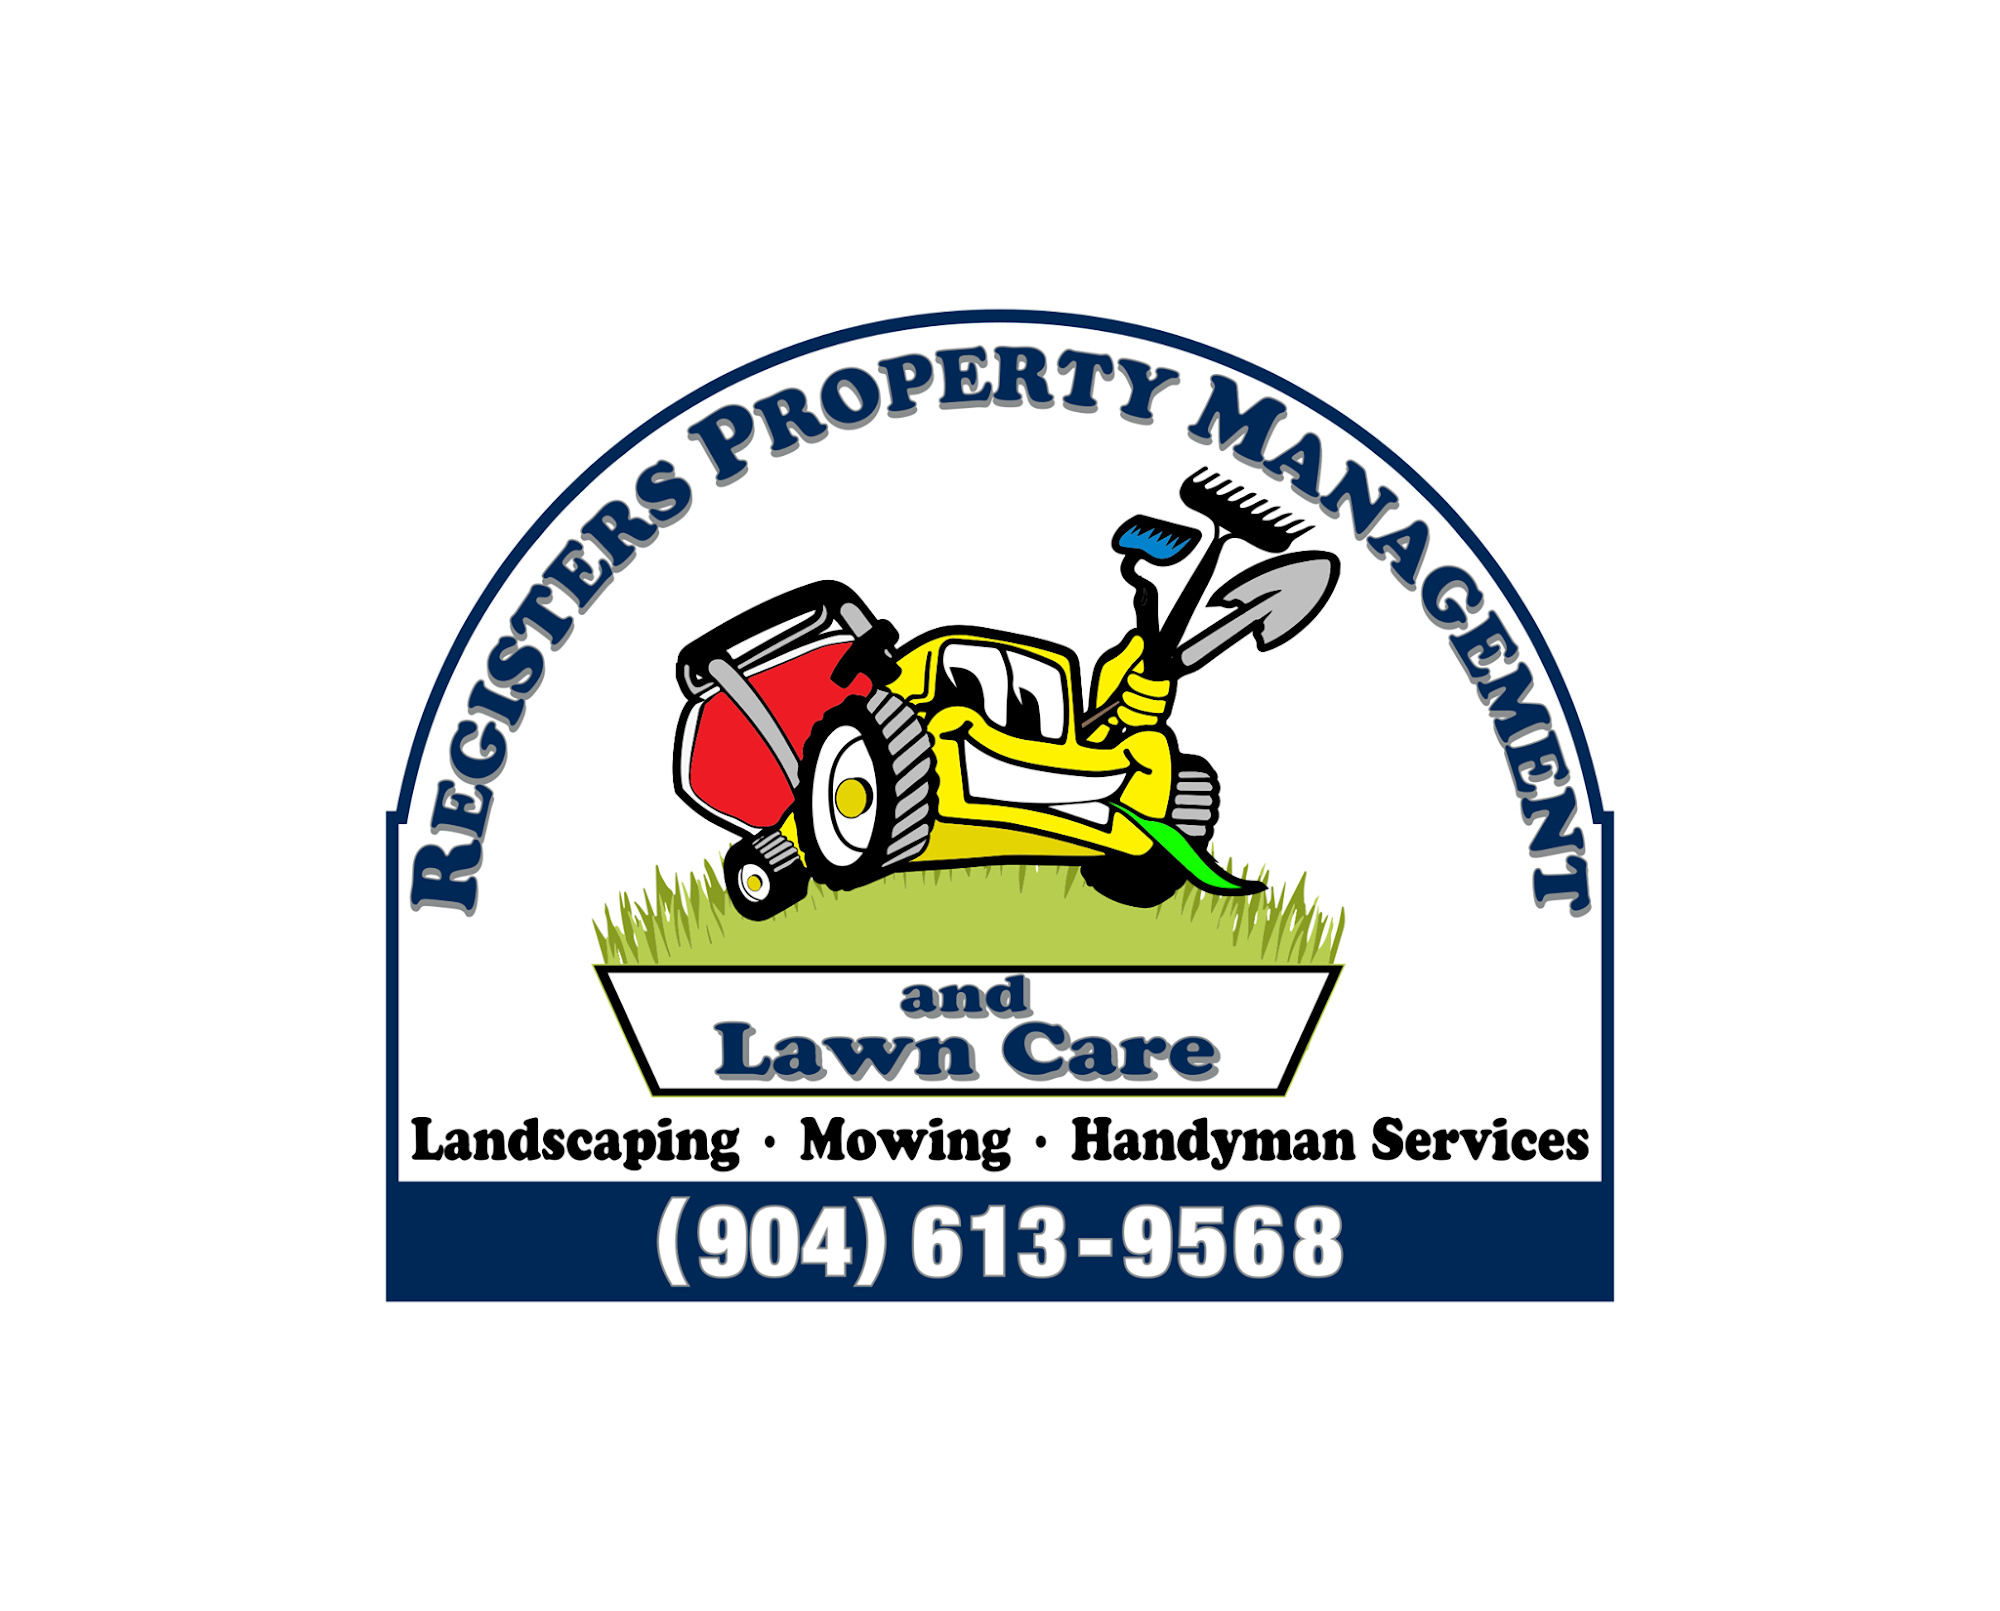 Register's Property Management and Lawn Care 8316 Claude Harvey Rd, Glen St Mary Florida 32040